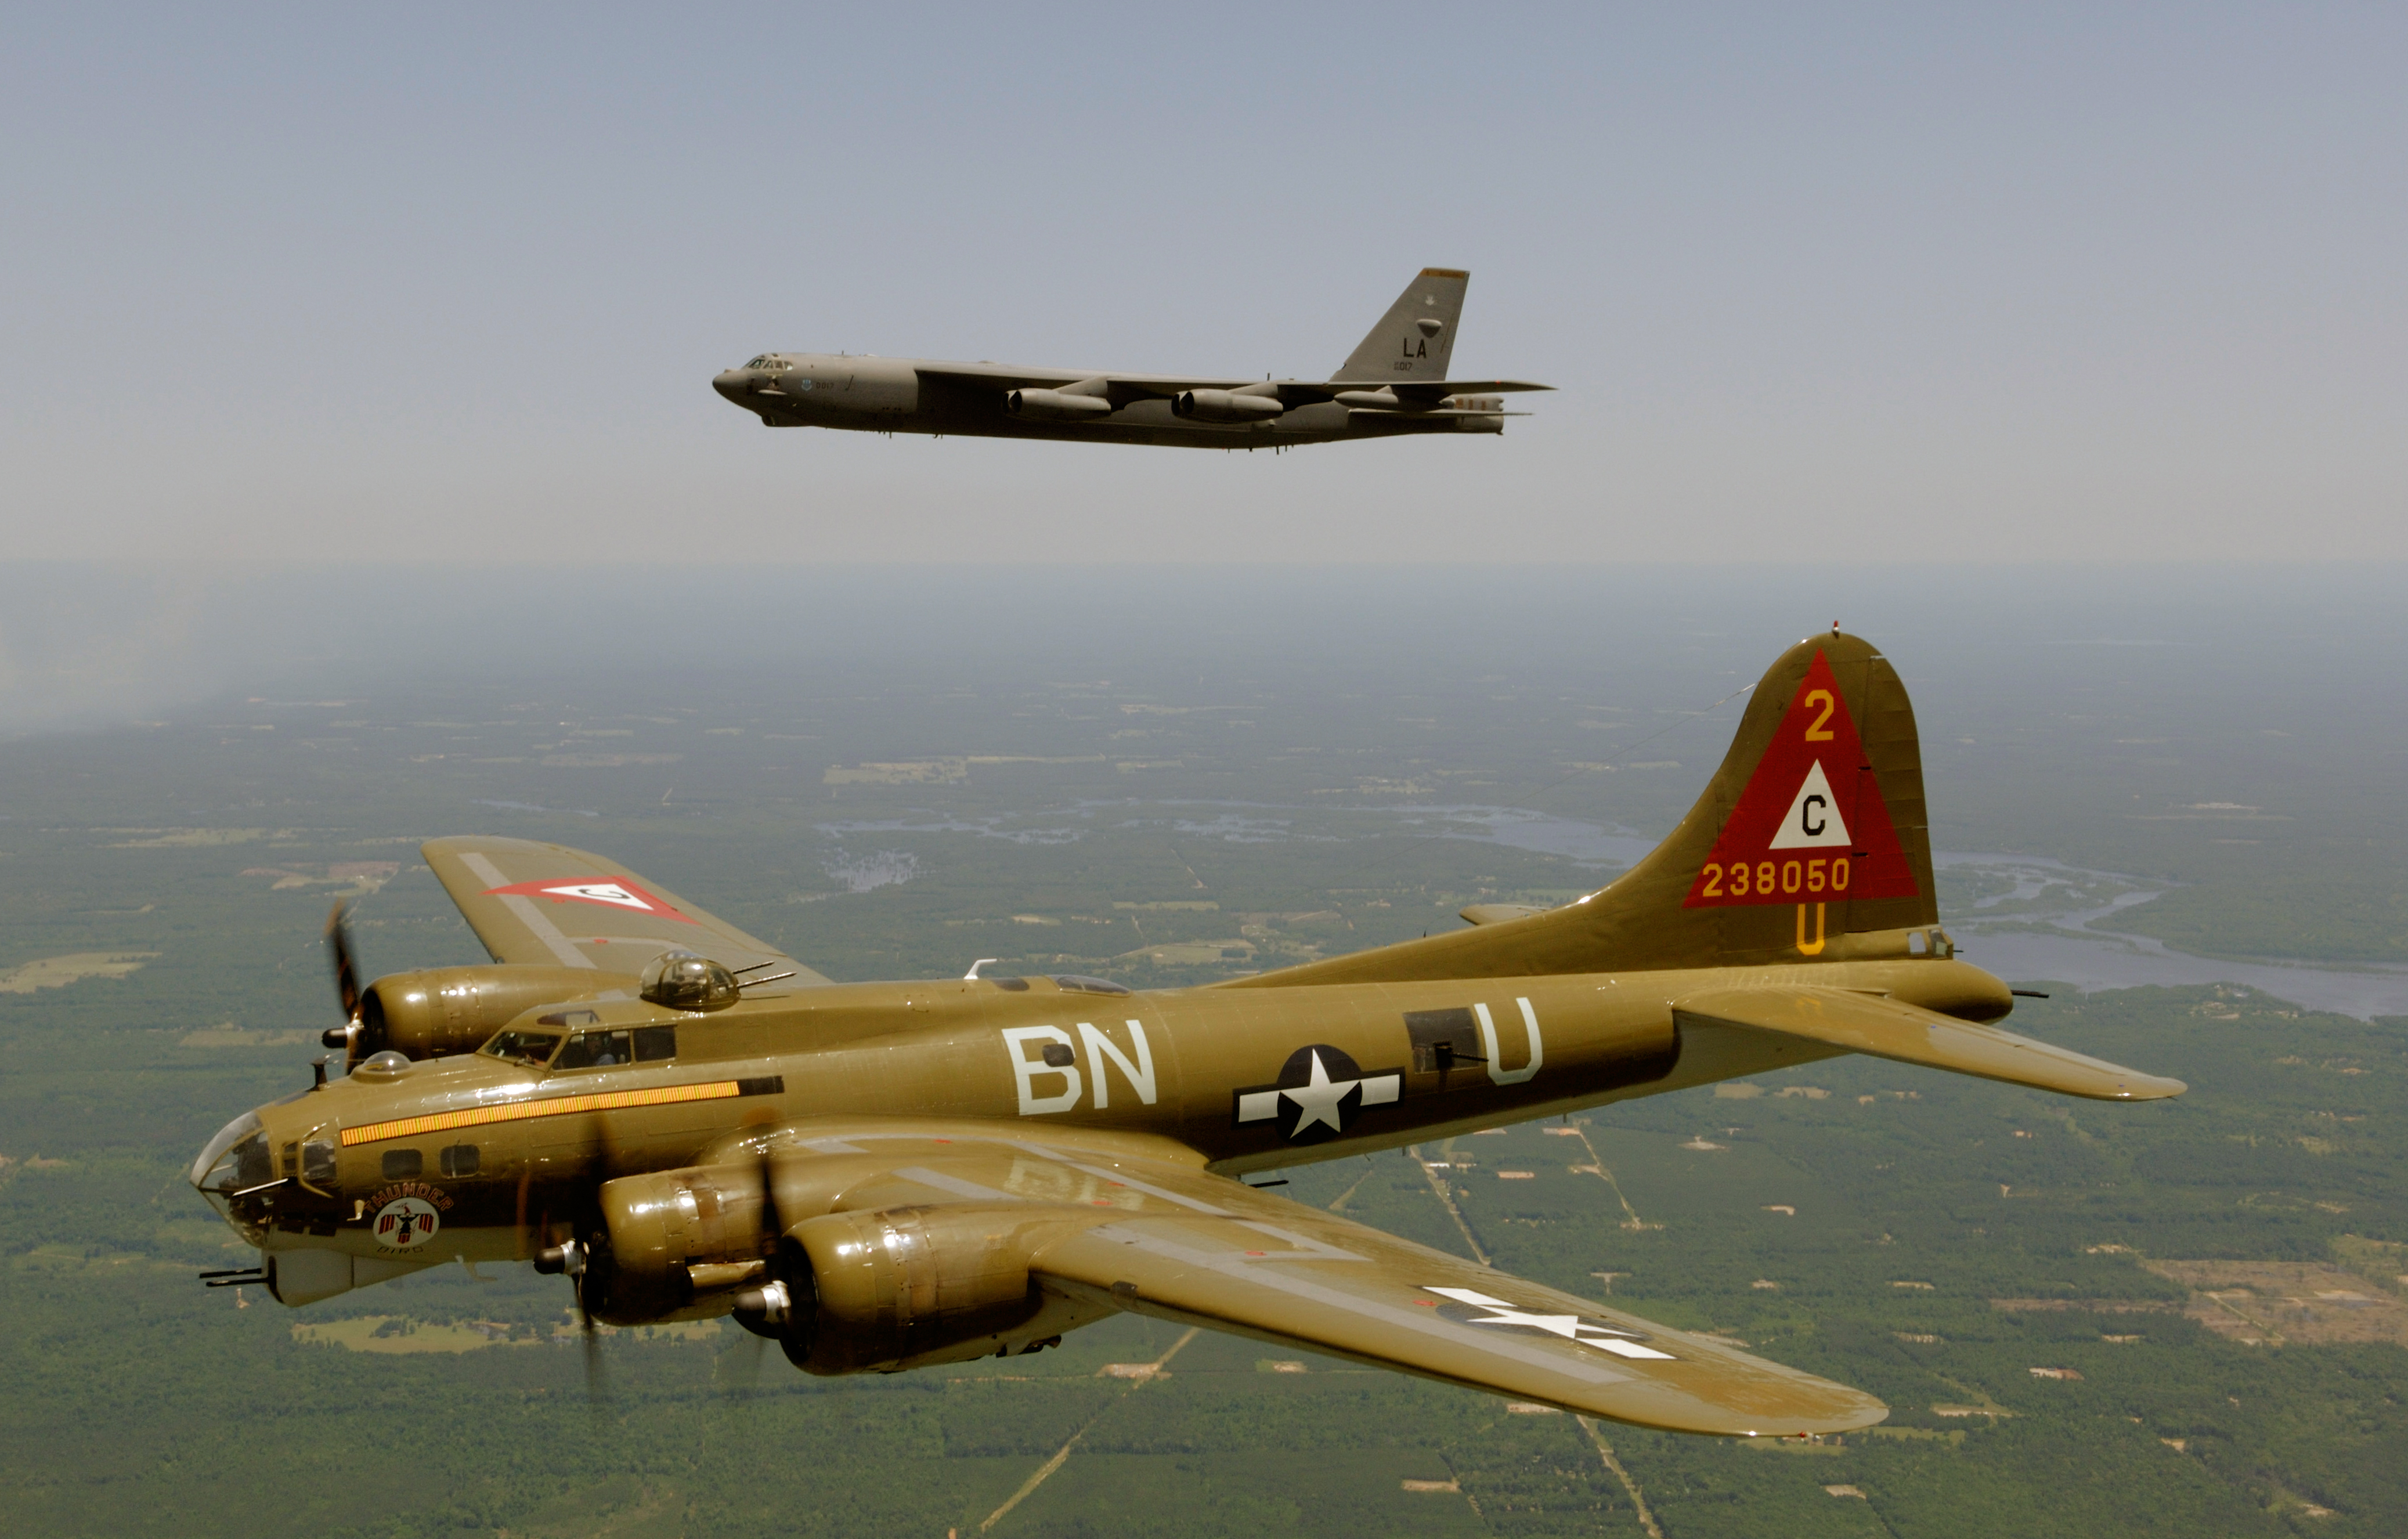 military, boeing b 17 flying fortress, boeing b 52 stratofortress, bombers